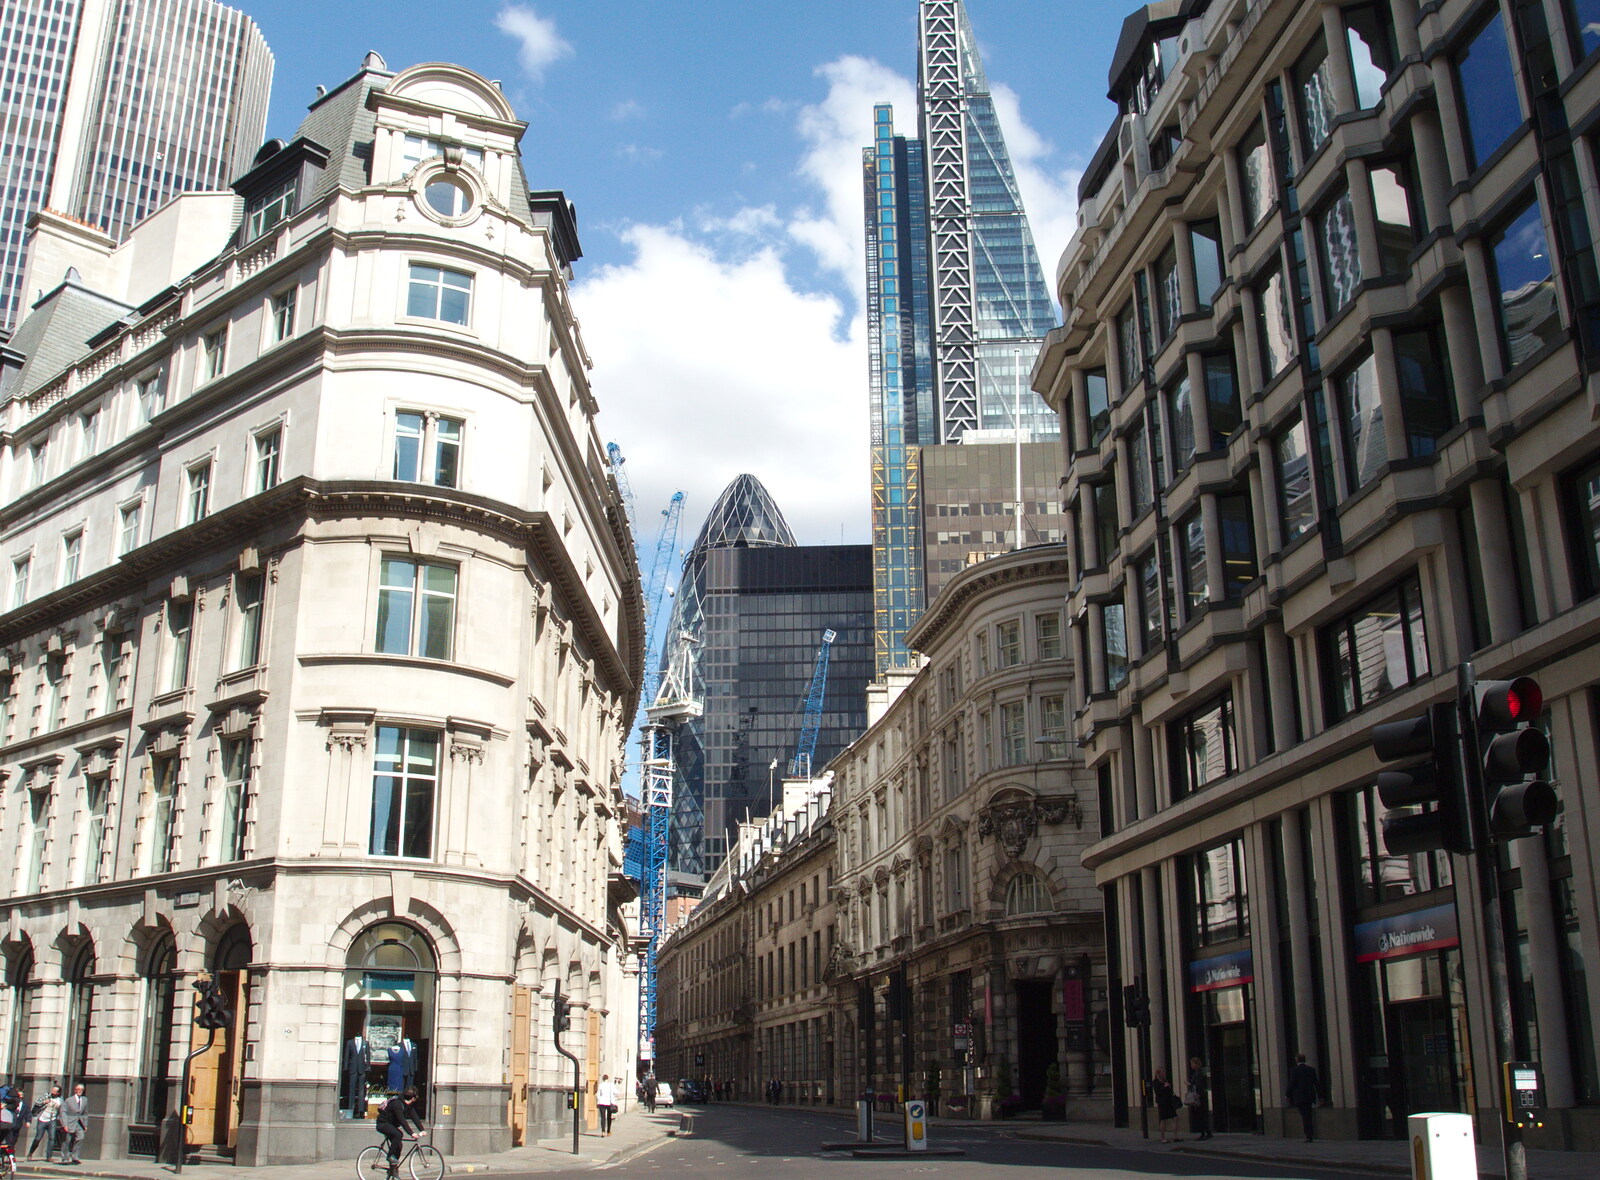 Old Broad Street and Threadneedle Street from A May Miscellany, London - 8th May 2014